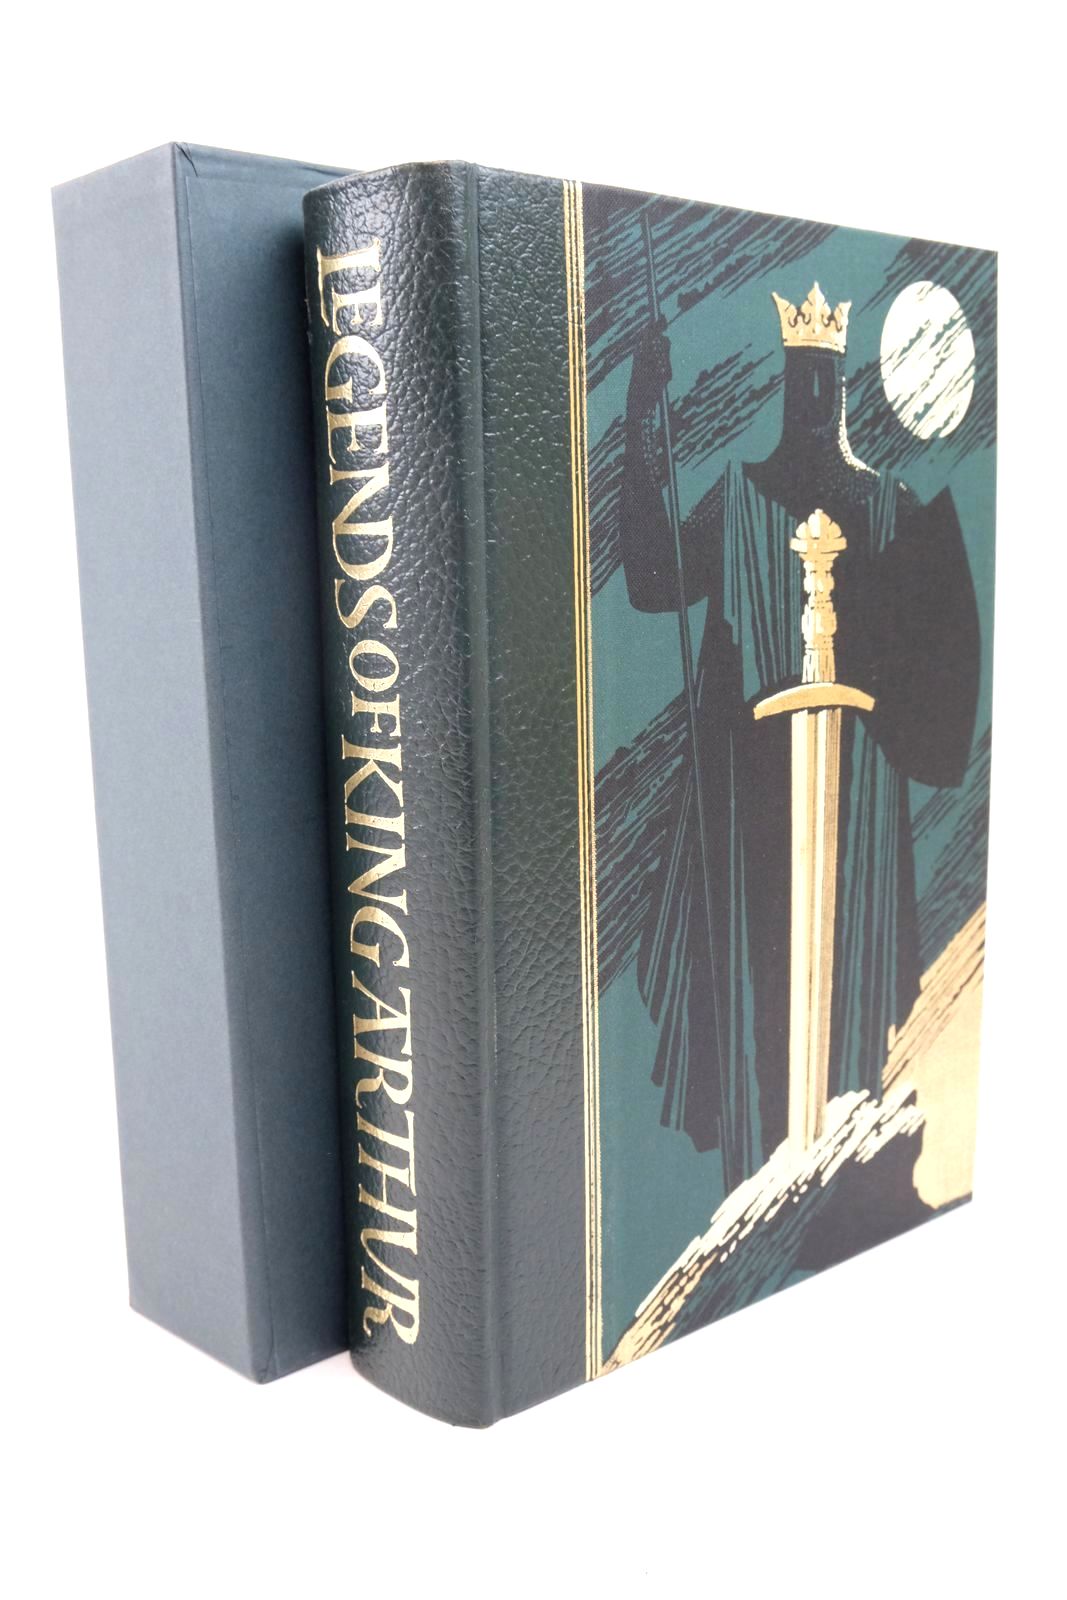 Photo of LEGENDS OF KING ARTHUR written by Barber, Richard illustrated by Pisarev, Roman published by Folio Society (STOCK CODE: 1322895)  for sale by Stella & Rose's Books